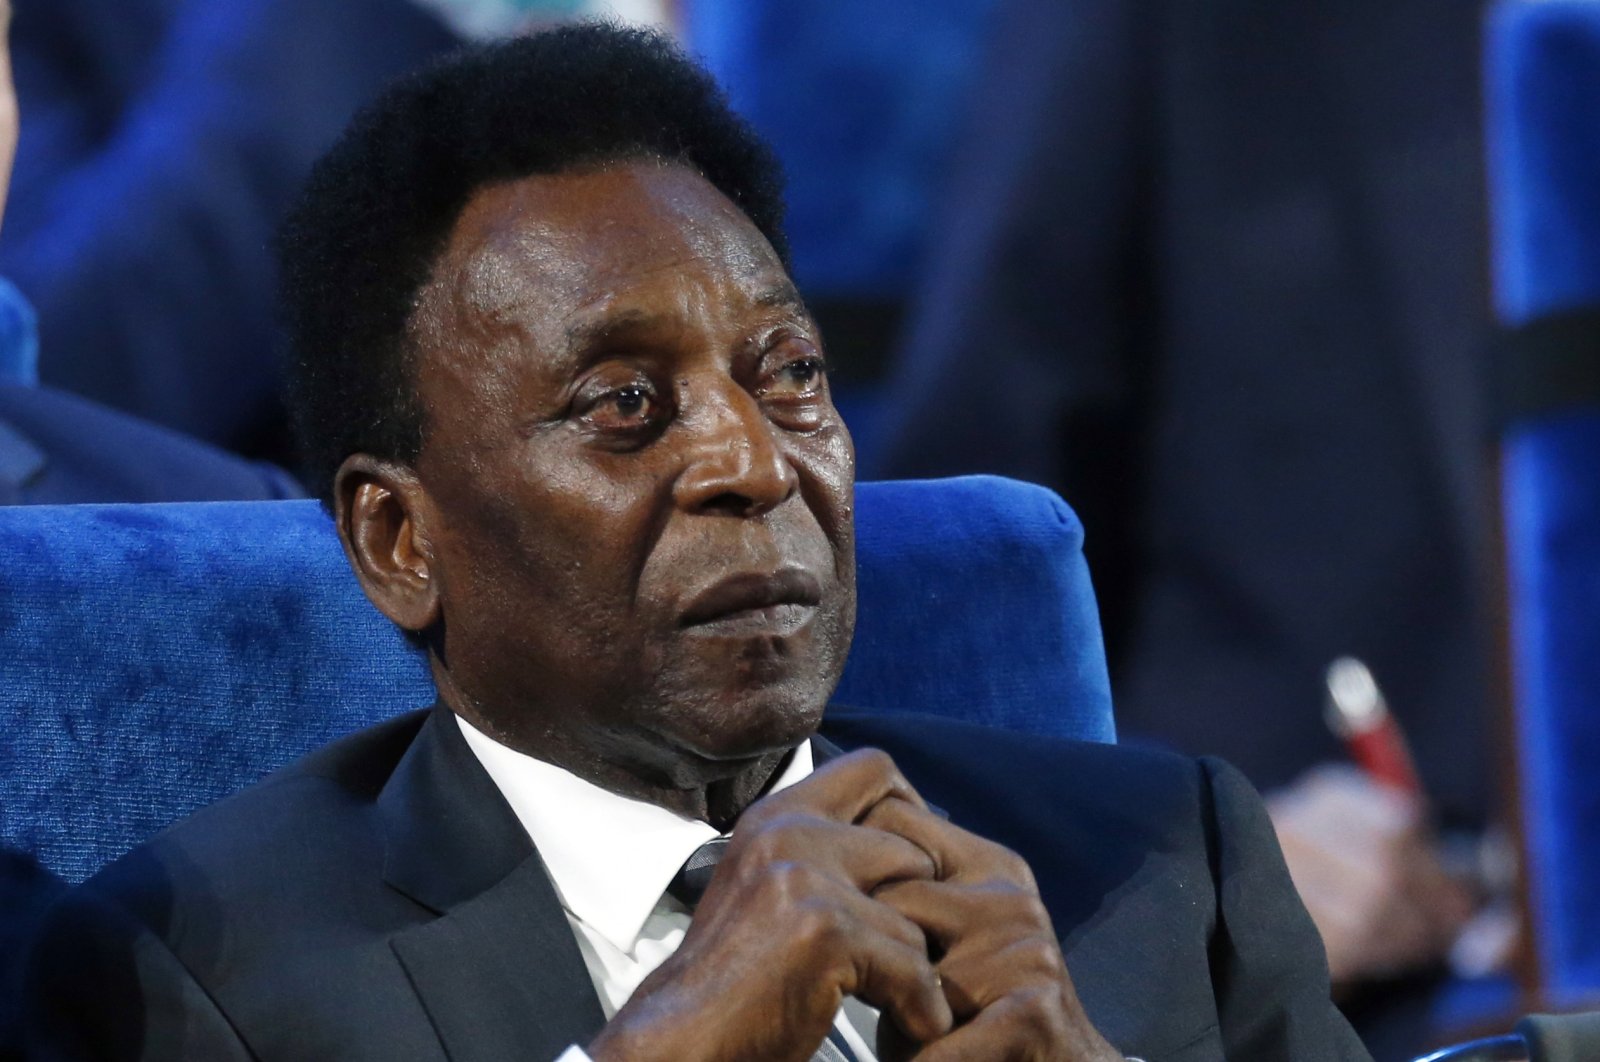 Brazilian Pele attends the 2018 football World Cup draw at the Kremlin in Moscow, Russia, Dec. 1, 2017. (AP Photo)